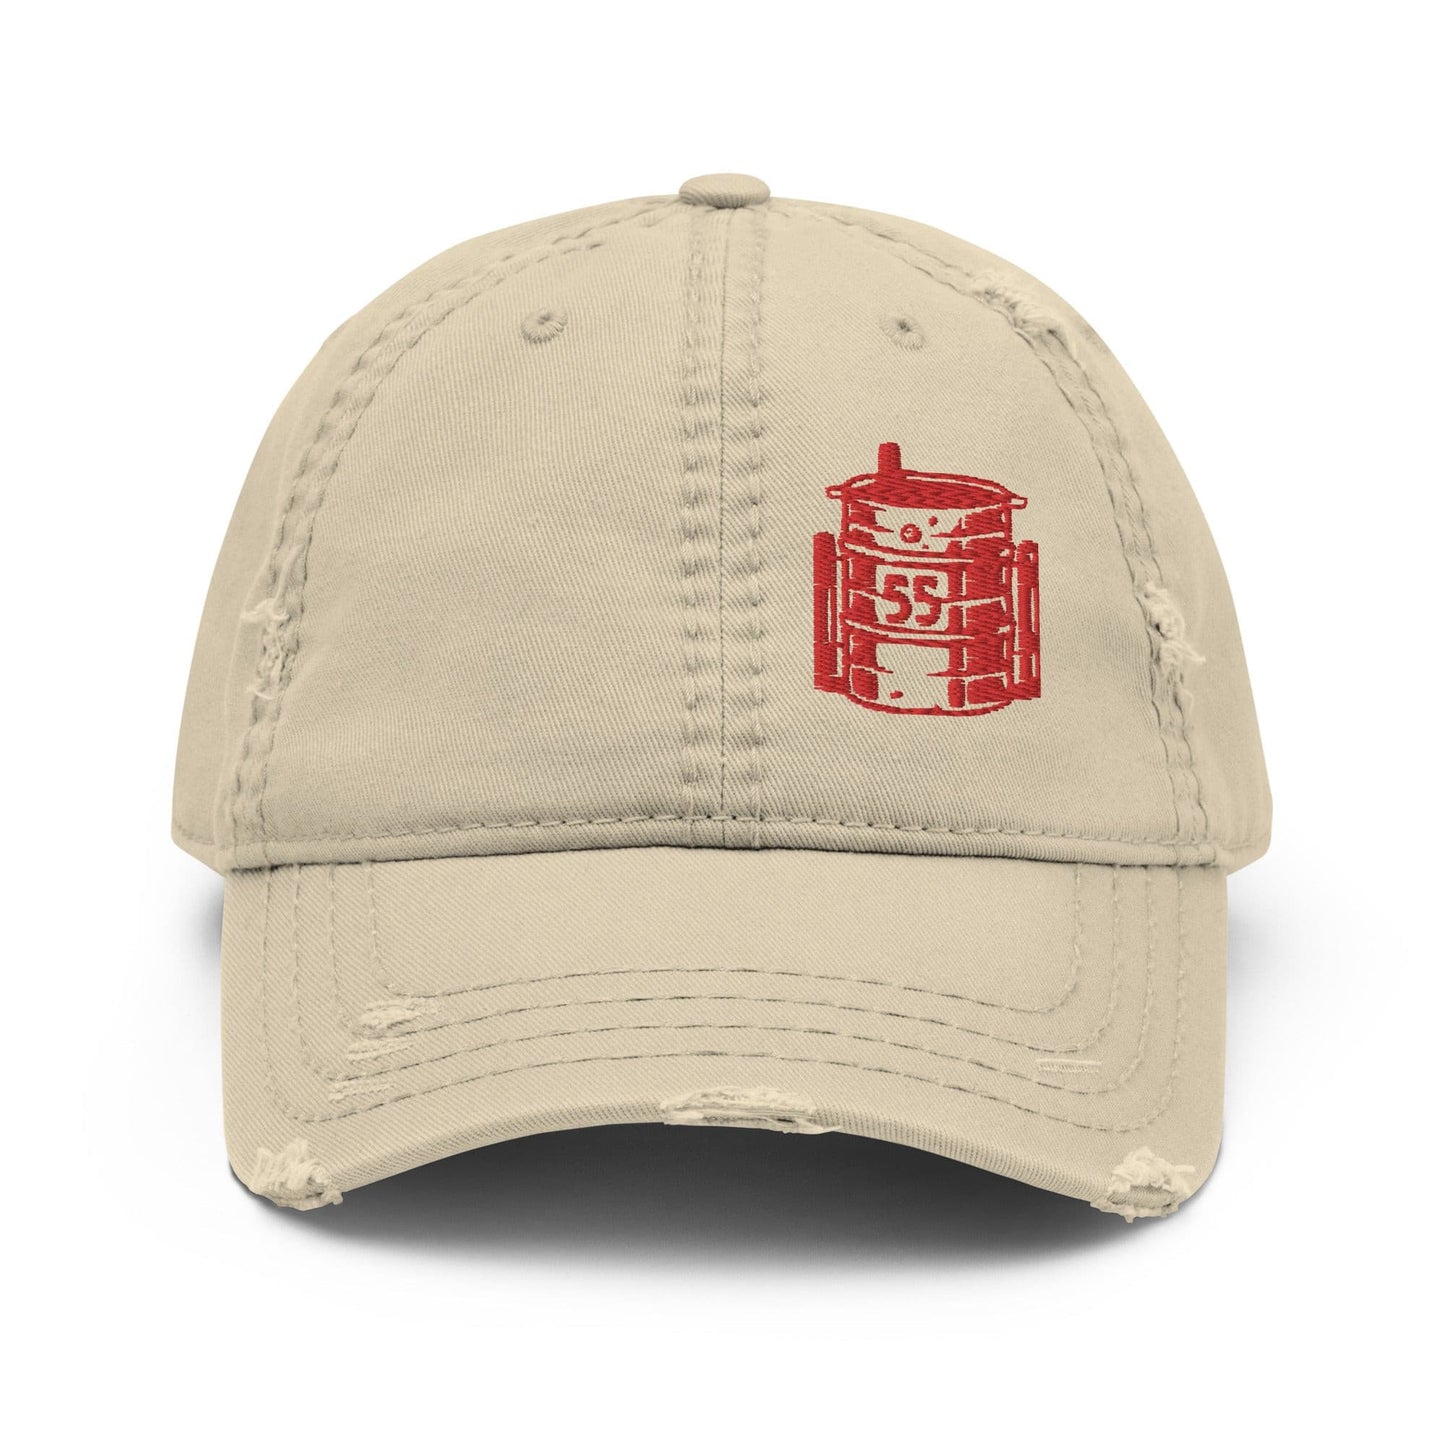 55 UDS Distressed Barbecue Dad Hat.